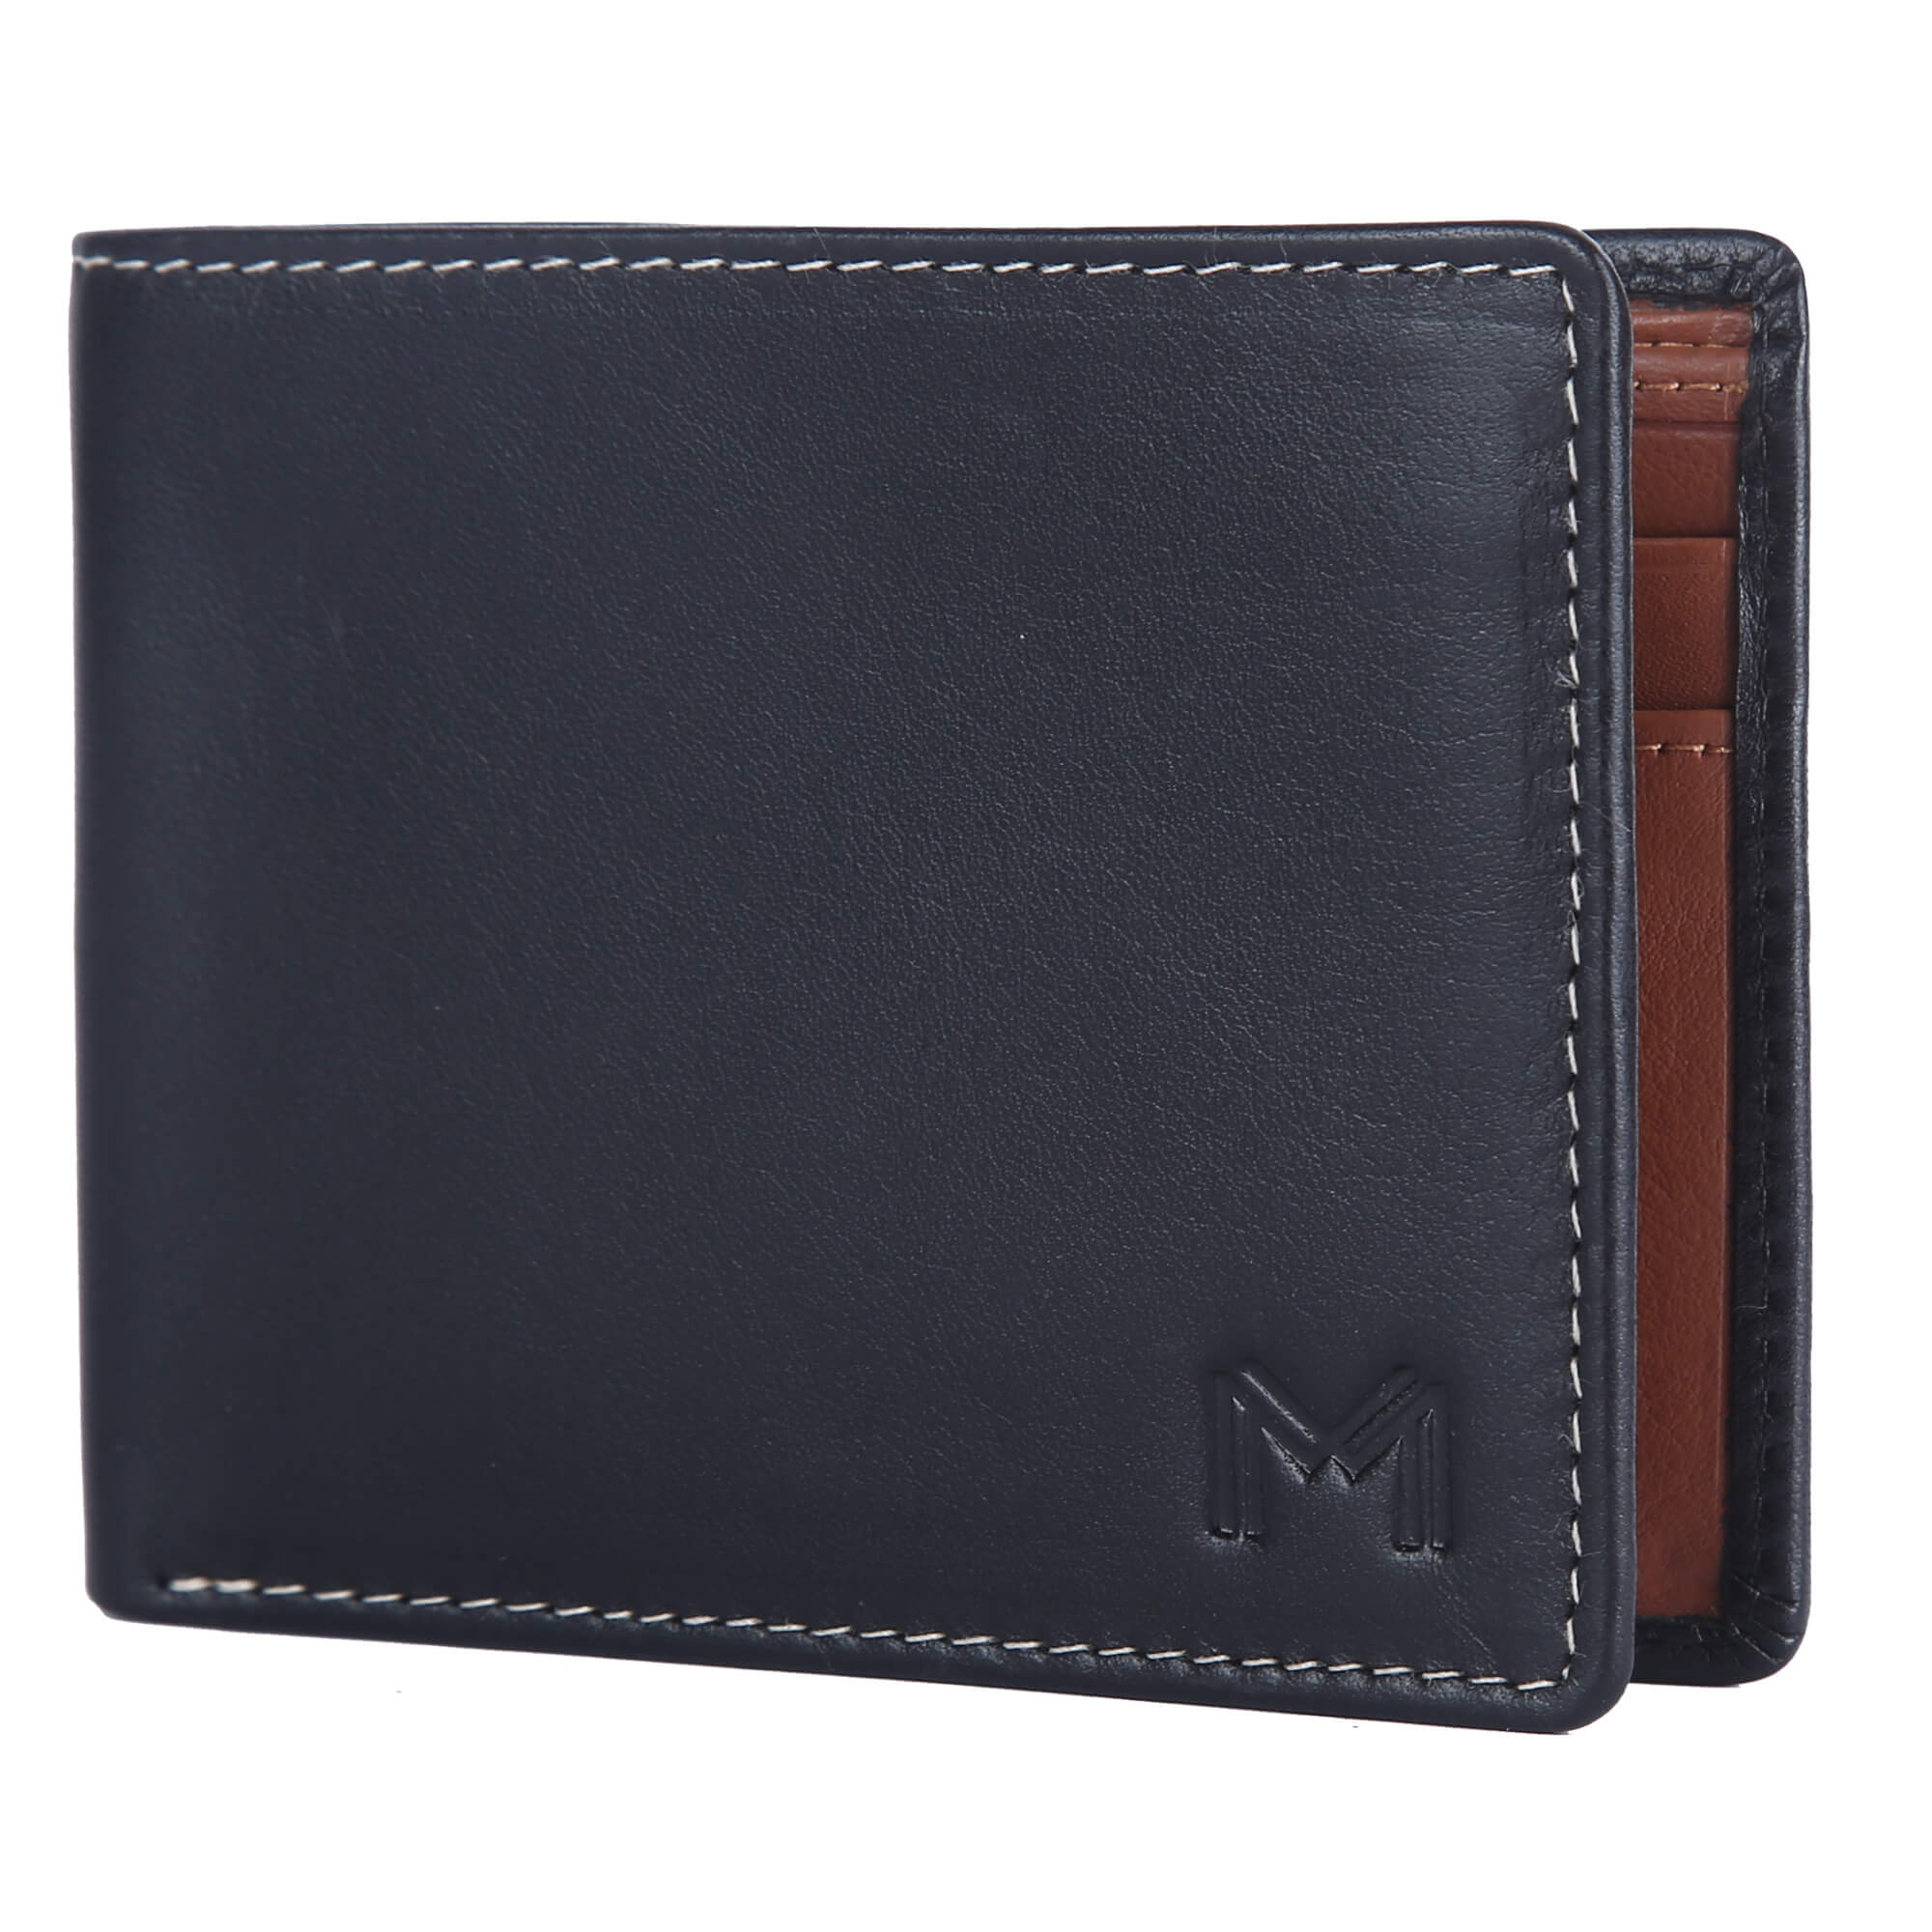 Bifold Wallet | Buy Genuine Leather Wallets at Best Prices | Massi Miliano